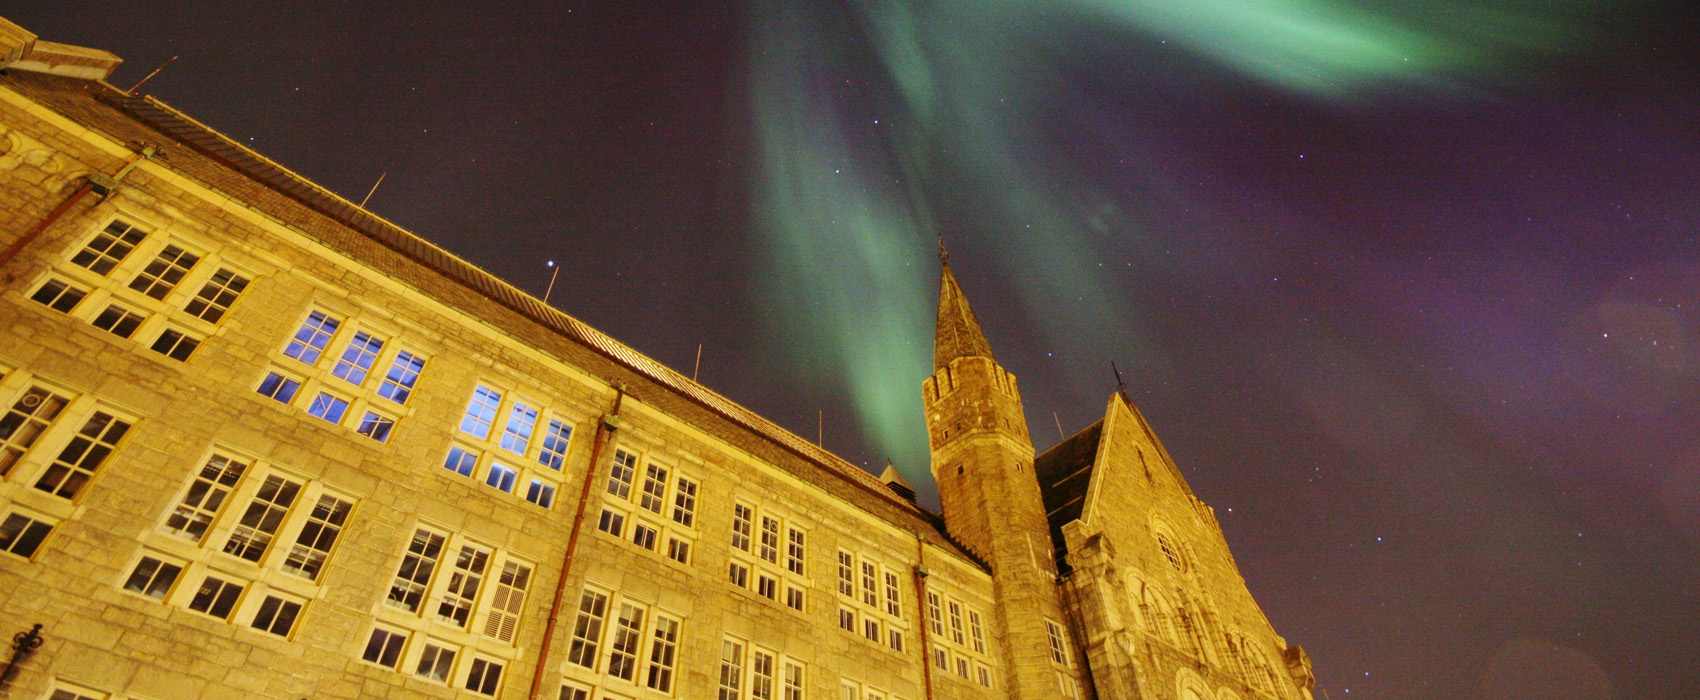 NTNU Main Building and Northern Light. Photo.